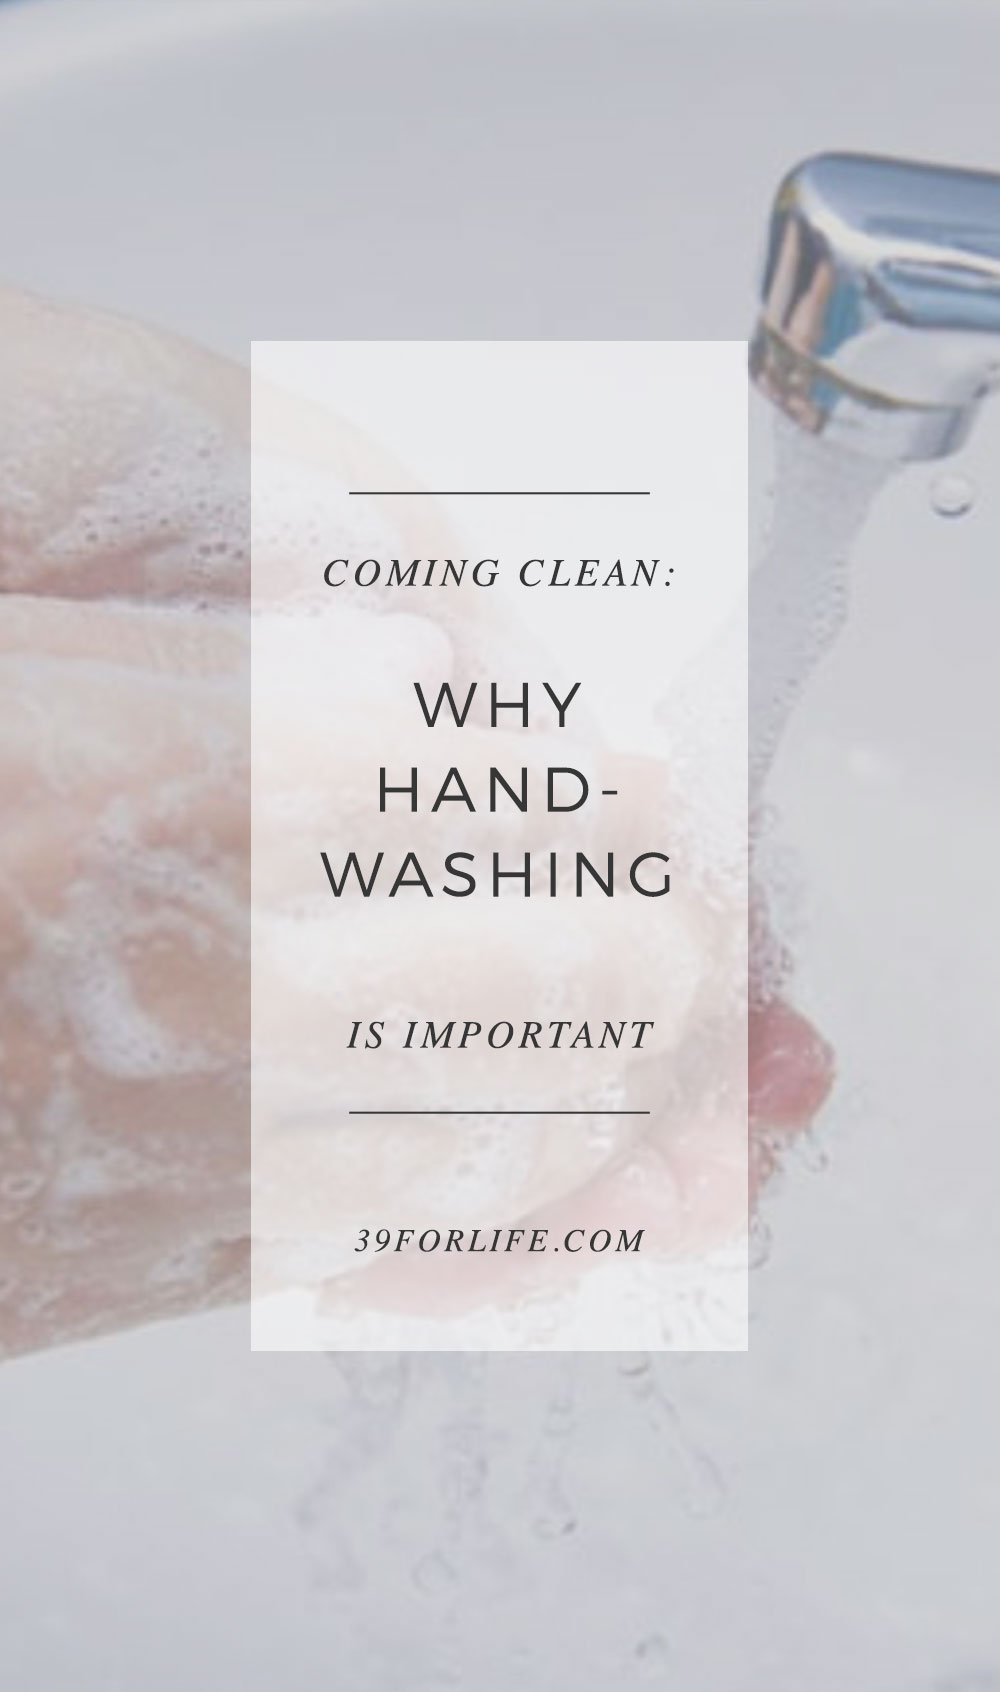 Ever wondered about the importance of handwashing? Here's why it's important, especially for medical professionals working with patients. If you work in healthcare, you need to read this!